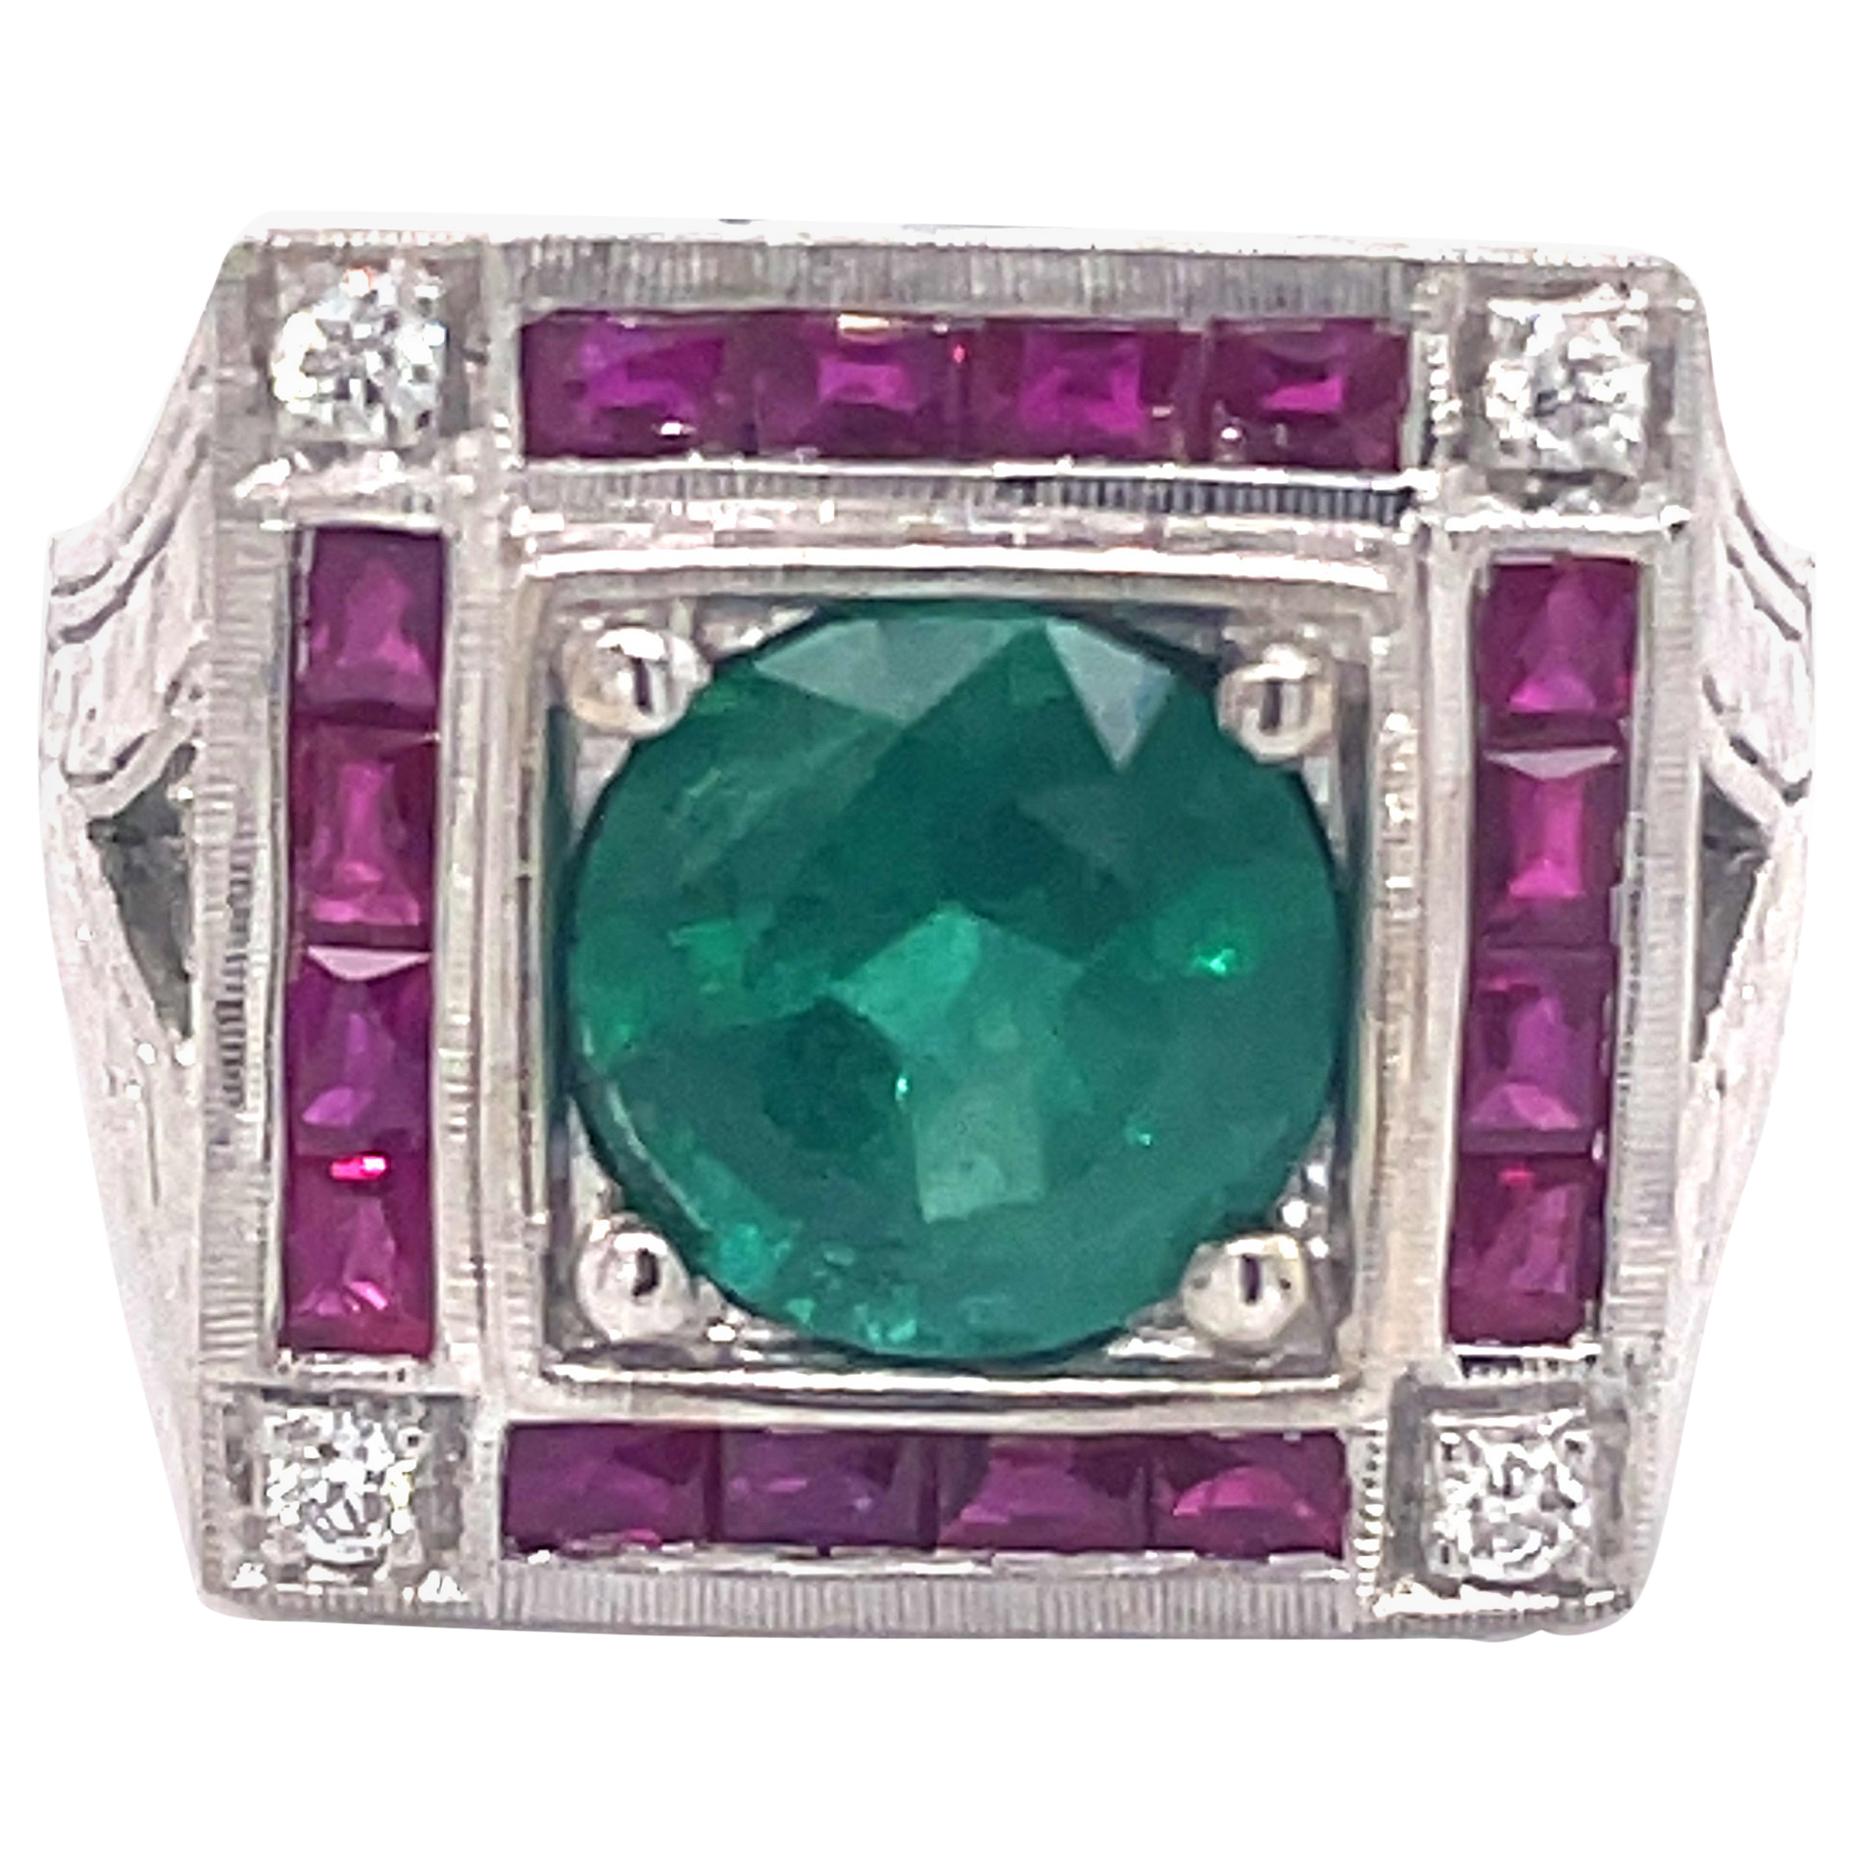 Art Deco Style 2.15 Carat Emerald with Rubies & Diamonds Ring 18k White Gold For Sale